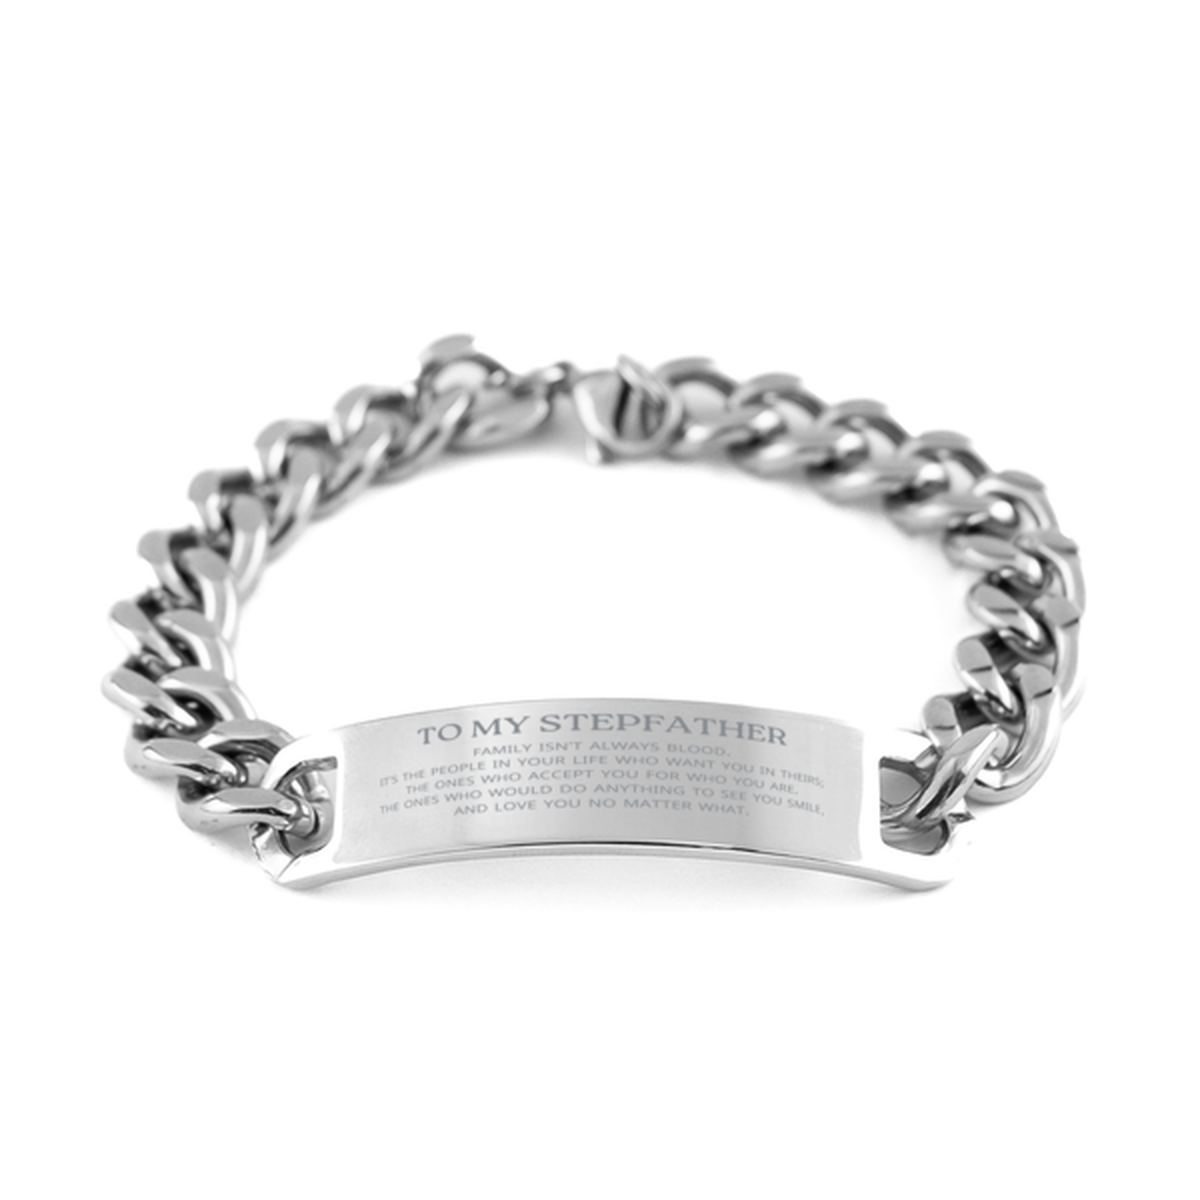 To My Stepfather Gifts, Family isn't always blood, Stepfather Cuban Chain Stainless Steel Bracelet, Birthday Christmas Unique Present For Stepfather